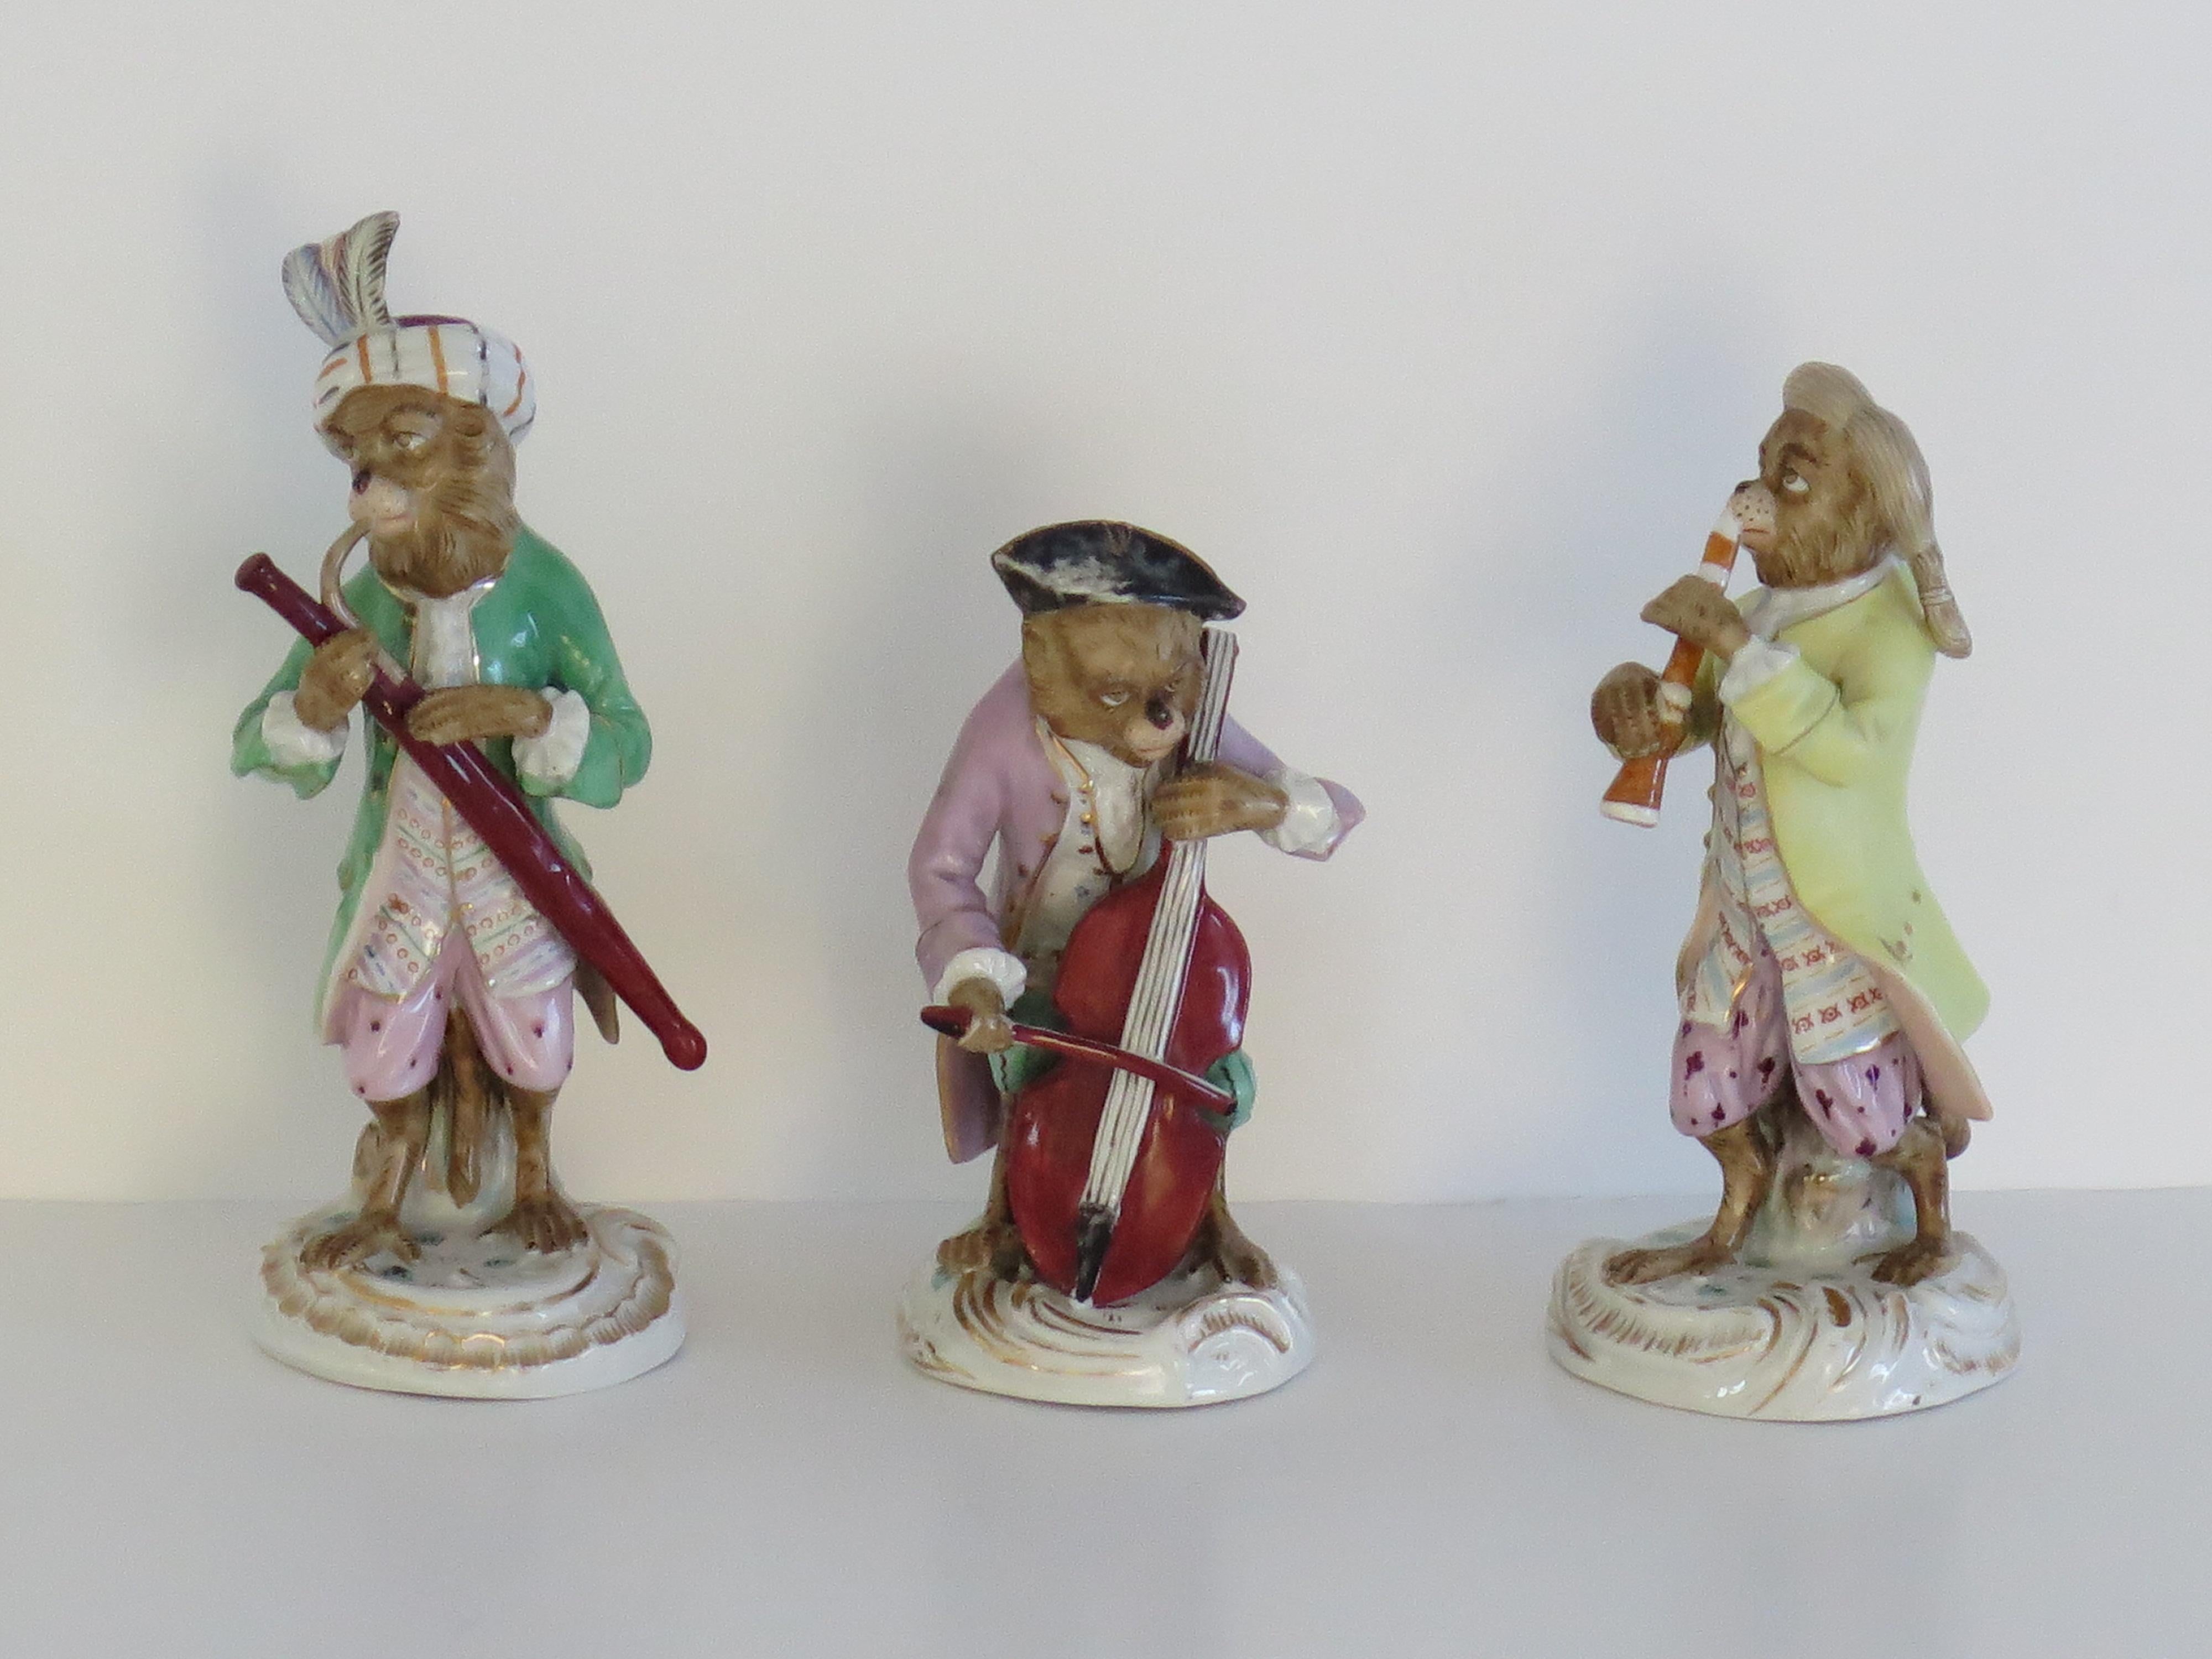 Hand-Painted Monkey Figurine NINE-Piece Set Musical Band by Sitzendorf Porcelain, Circa 1910 For Sale